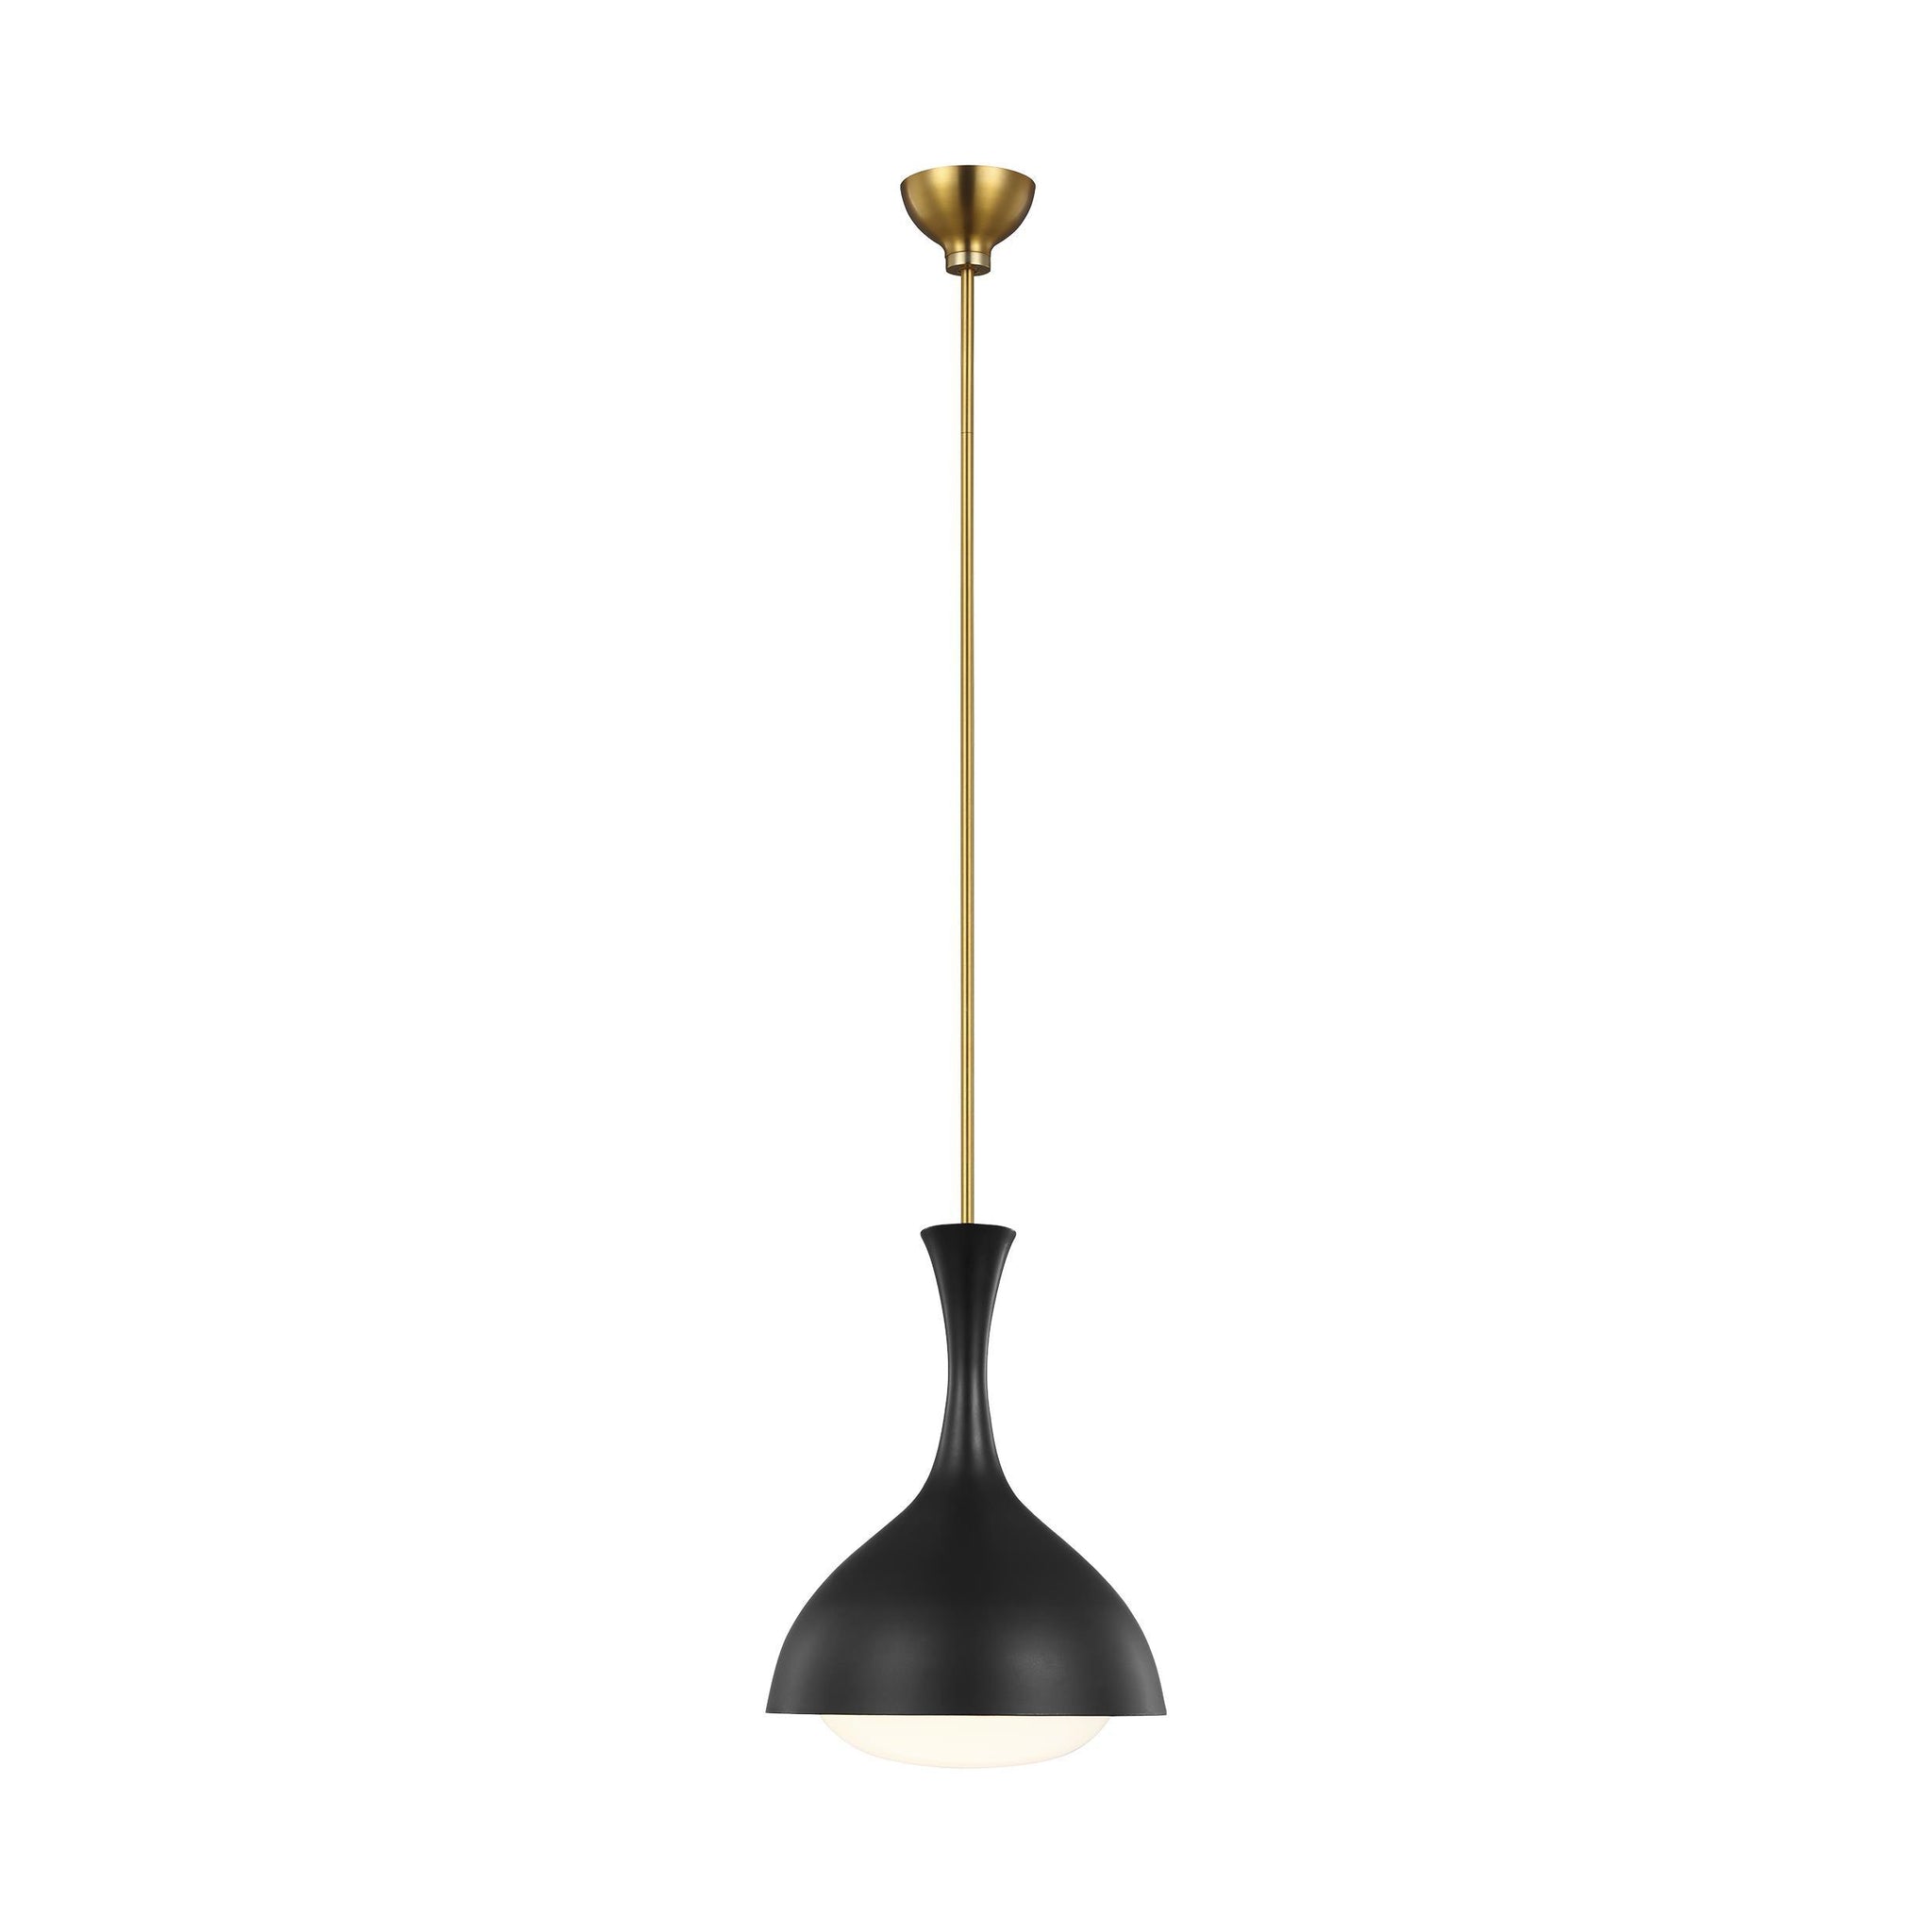 Lucerne One Light Small Pendant